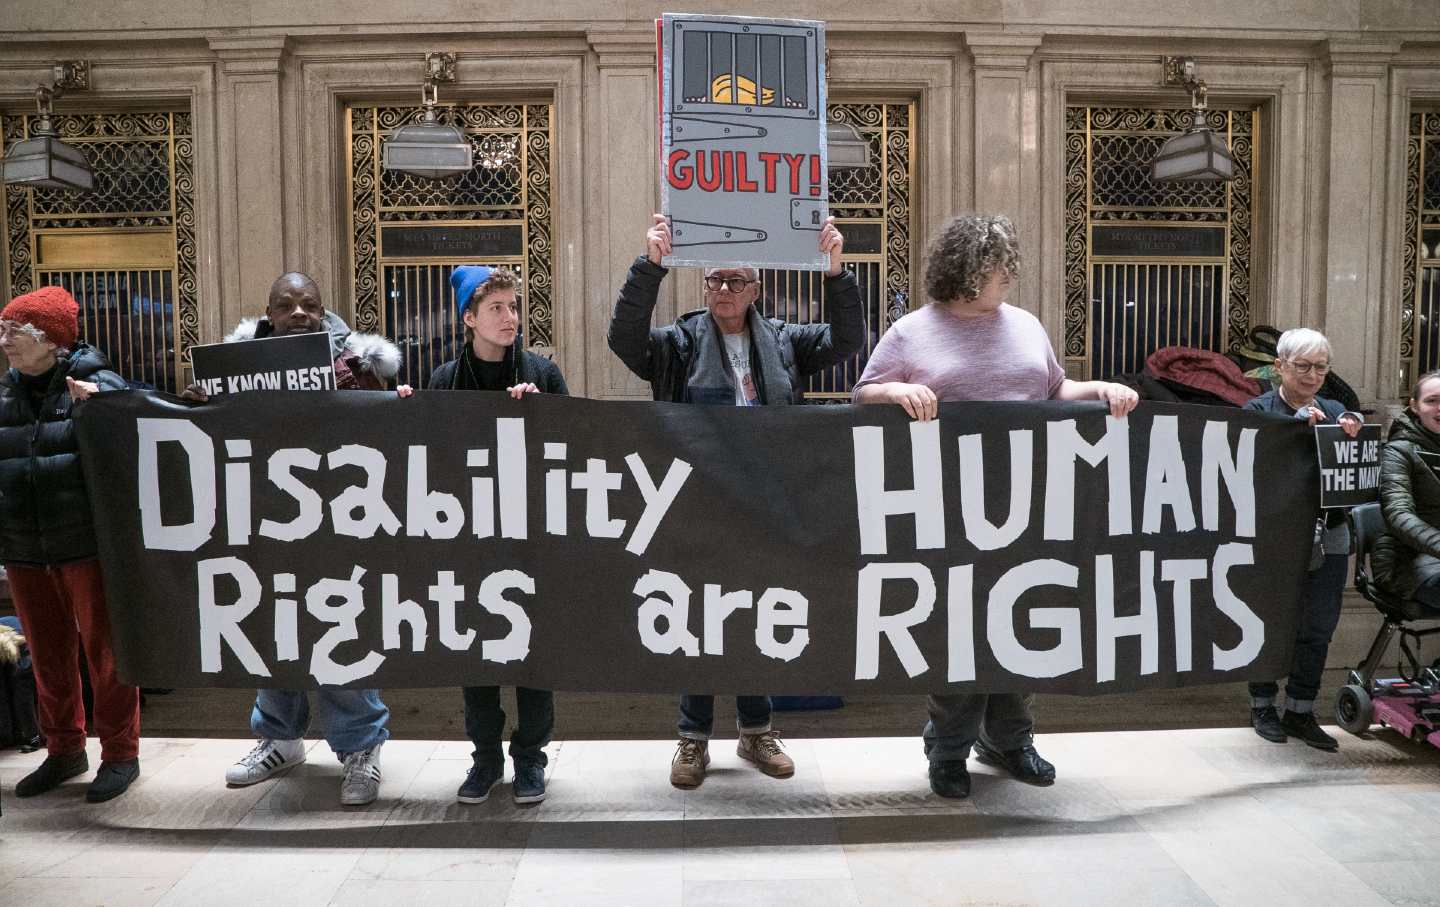 Demonstrators holding a banner that reads “Disability Rights are Human Rights”